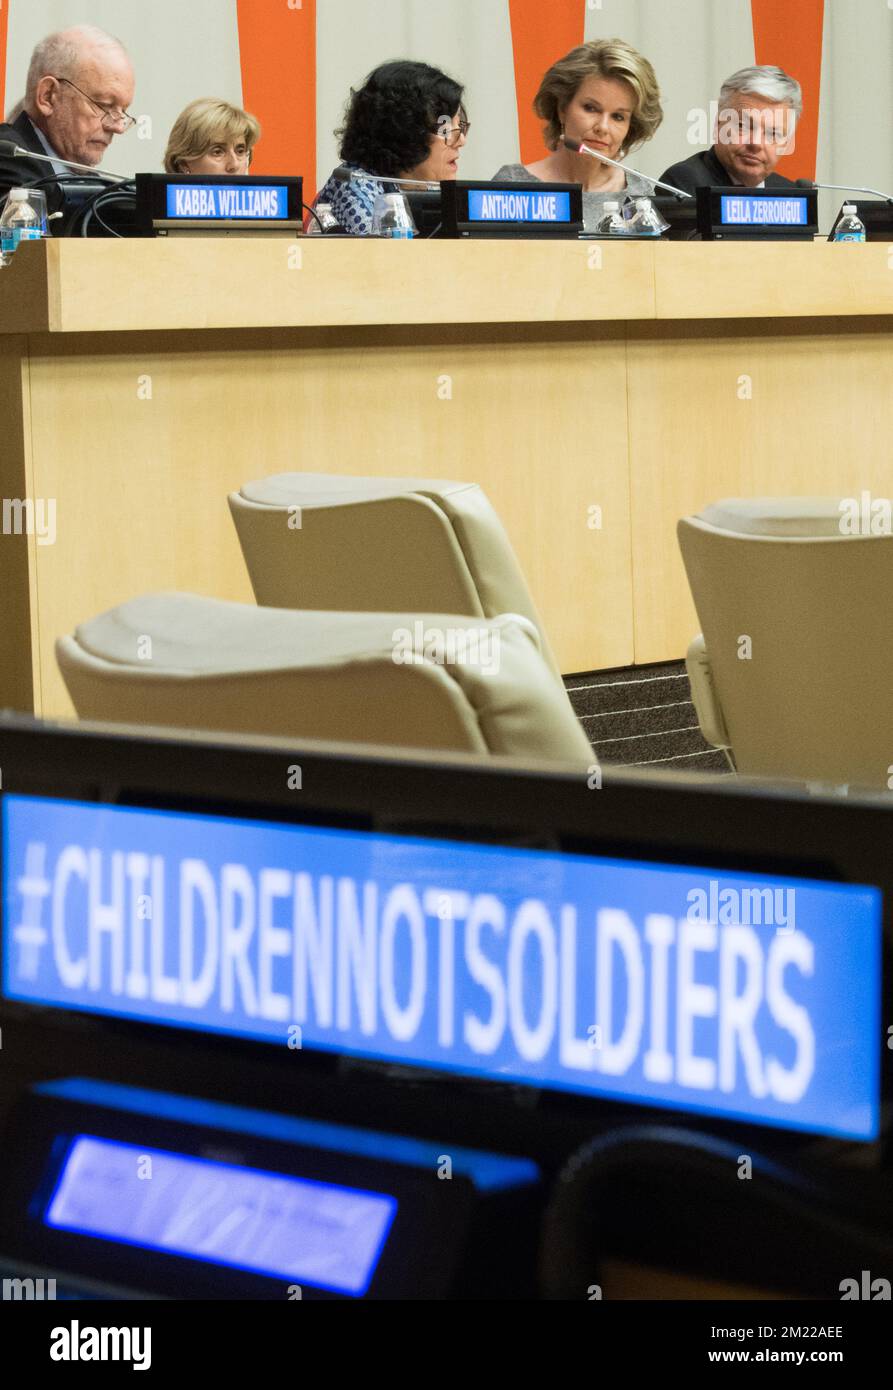 Queen Mathilde of Belgium and Vice-Prime Minister and Foreign Minister Didier Reynders pictured during the 'Children, Not Soldiers' United Nations conference, on the first day of a visit of Belgian Queen and Foreign Minister to New York, on Monday 11 July 2016, in the United States.  Stock Photo